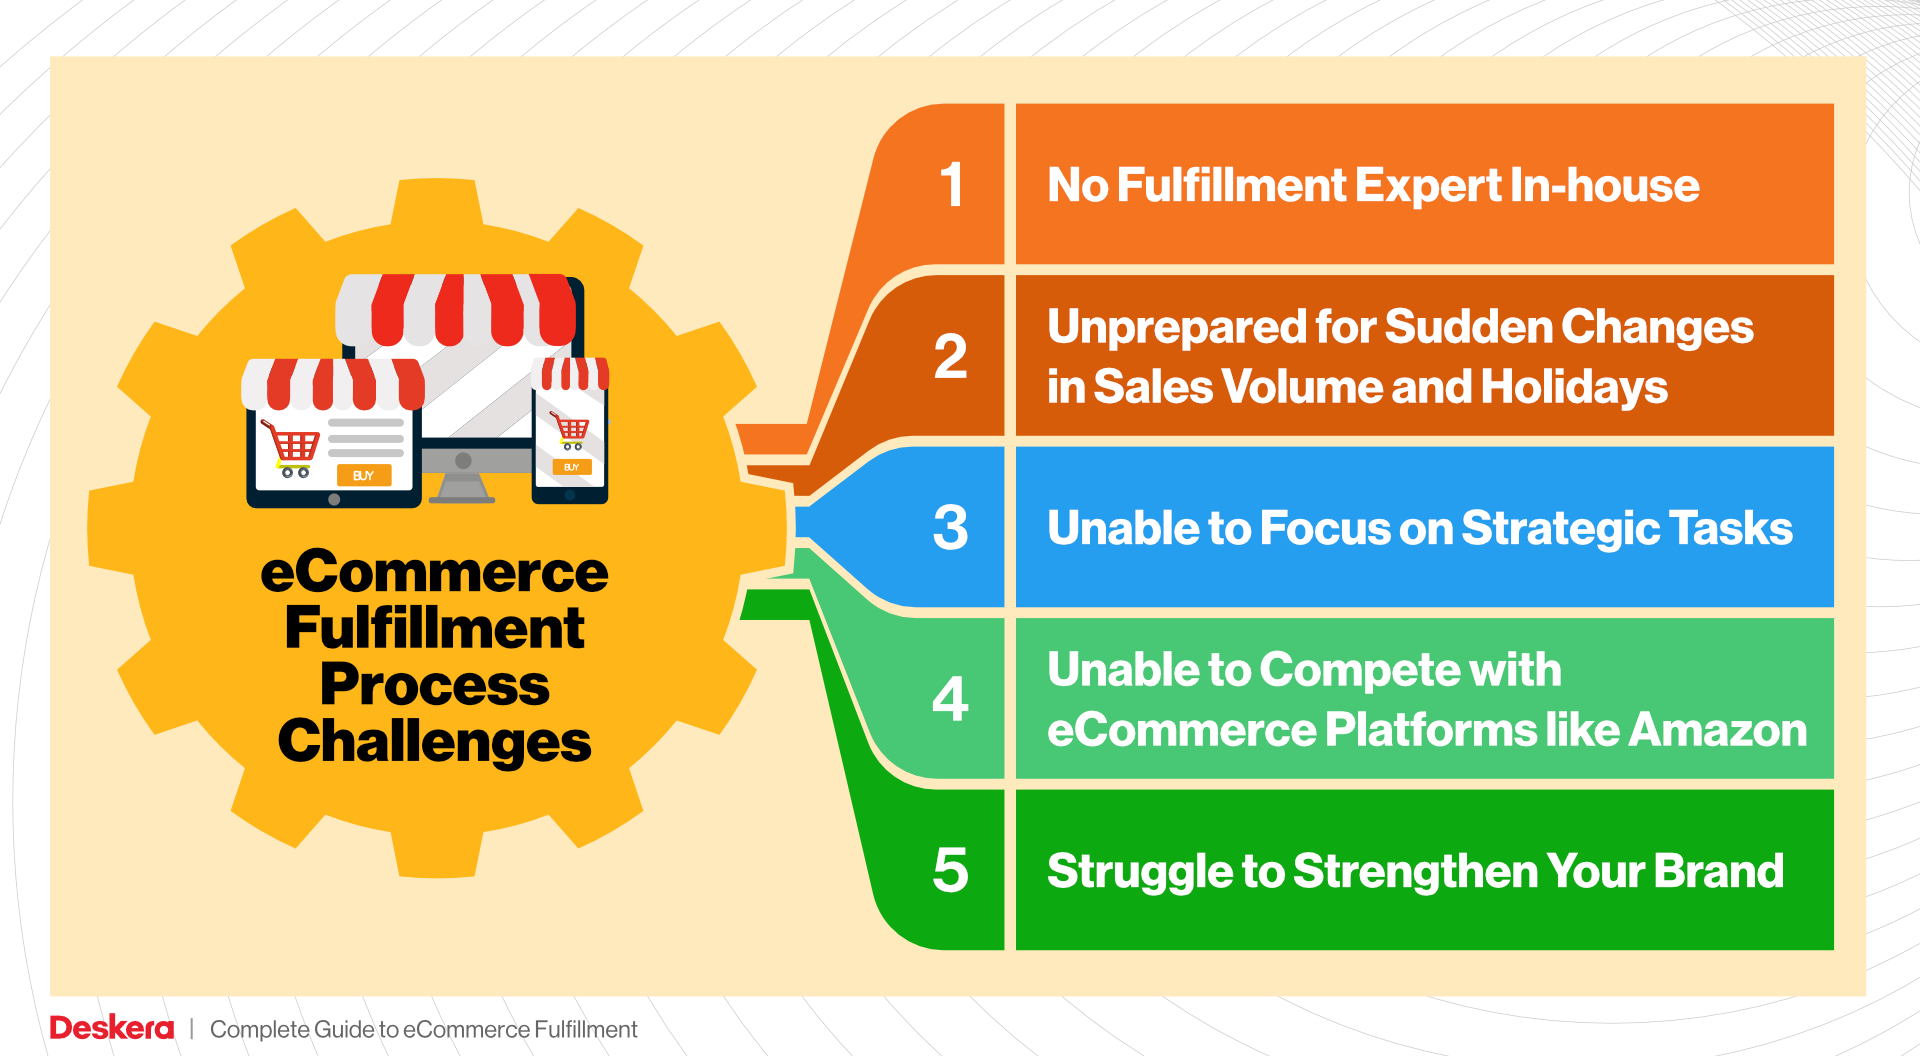 eCommerce Fulfillment Process Challenges